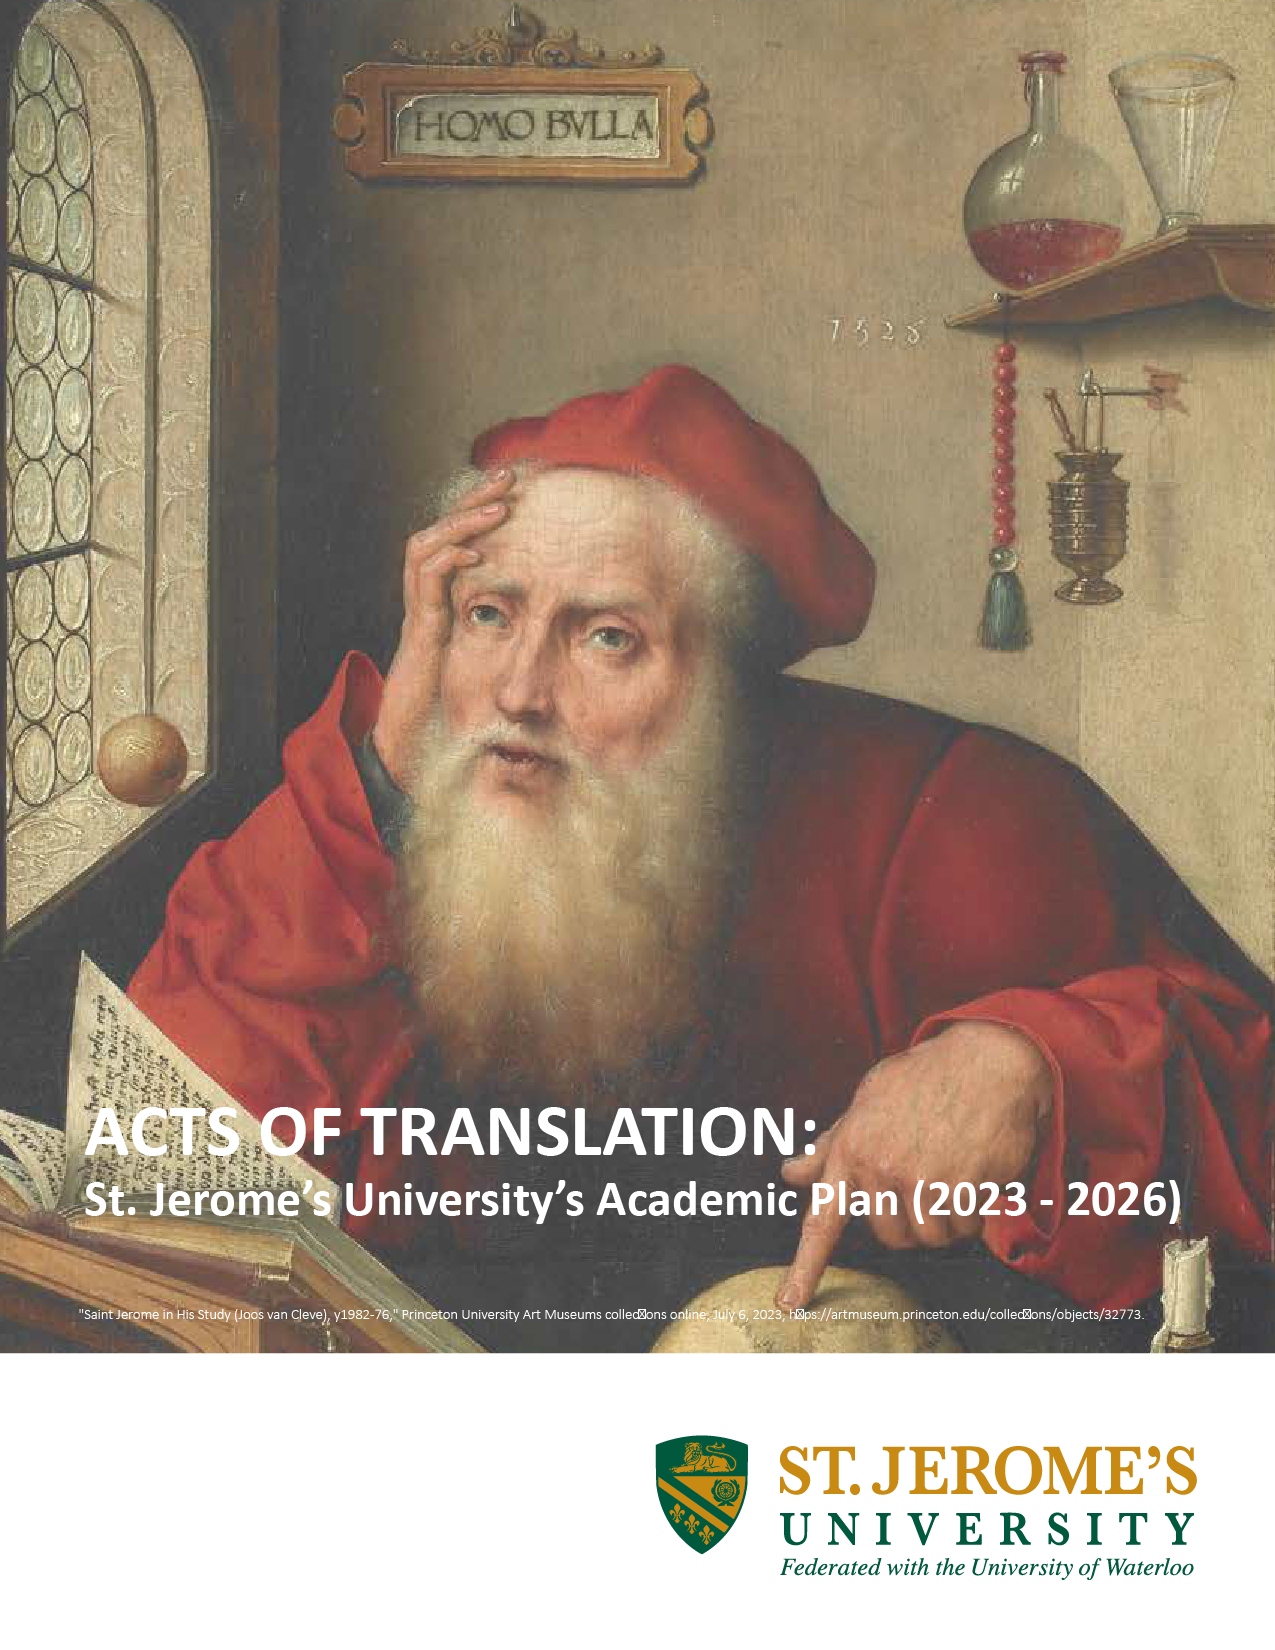 Image of St. Jerome on the cover of the academic plan